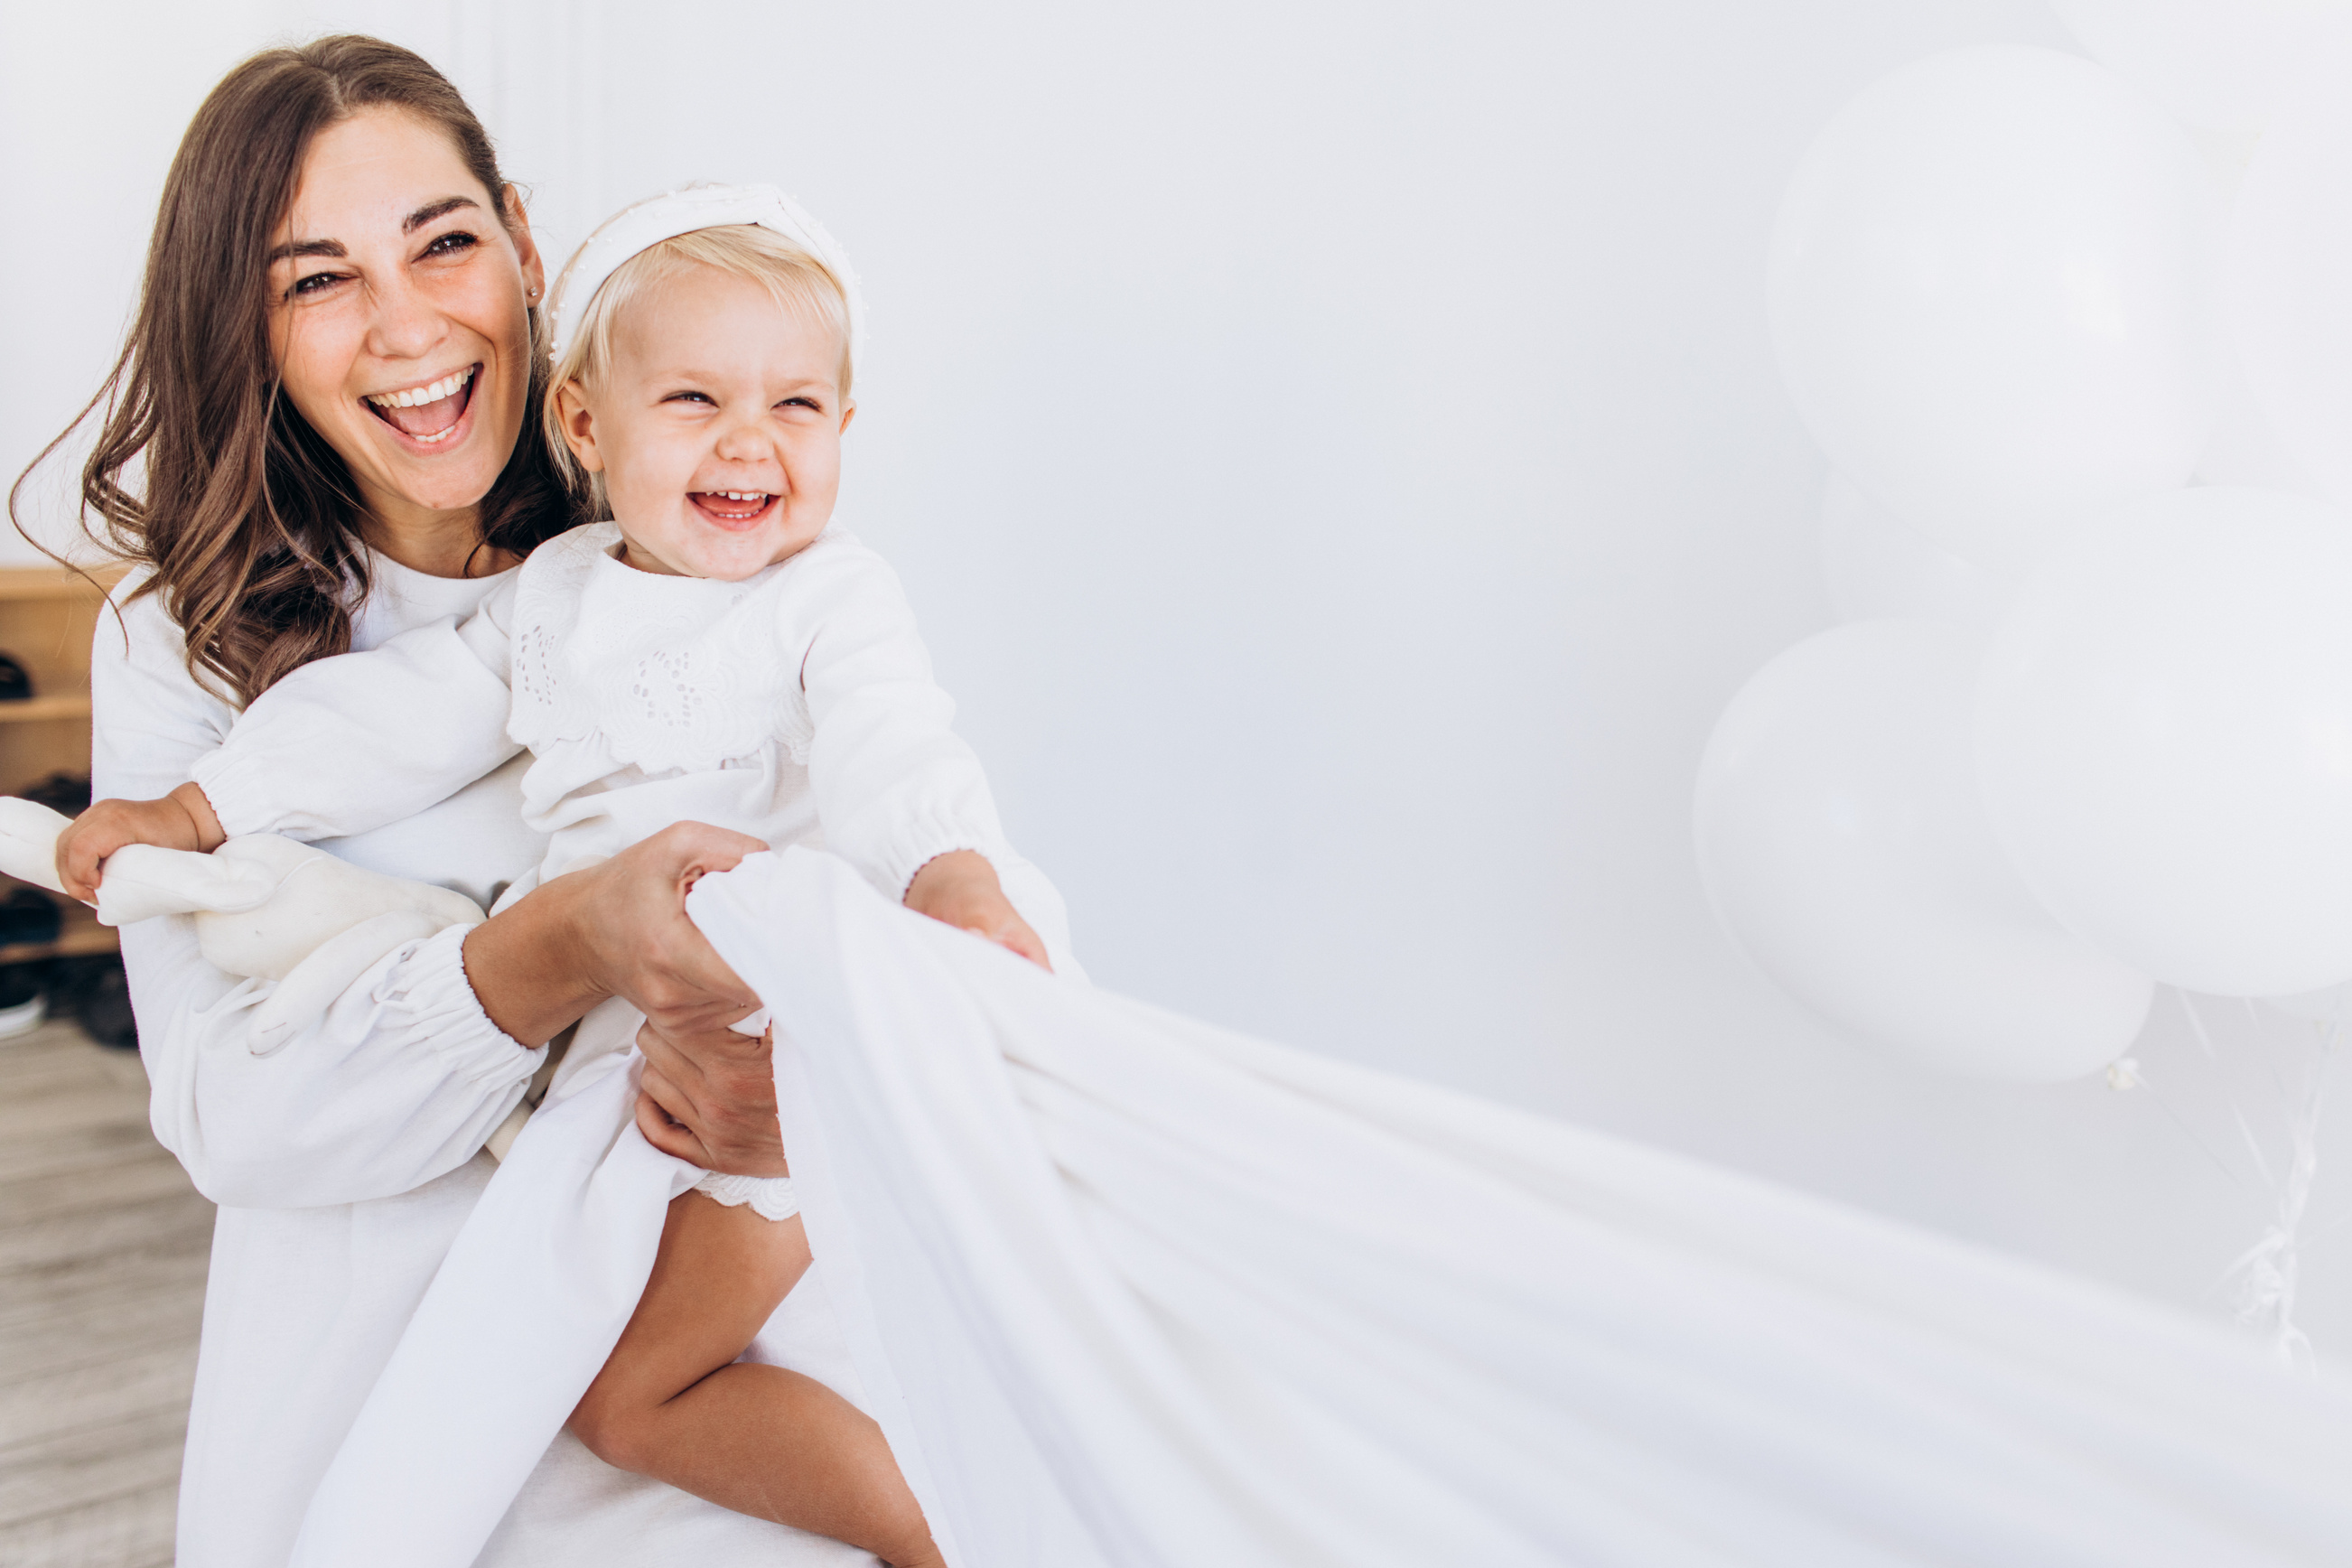 Mom and daughter play with a sheet. The baby and mom are smiling.